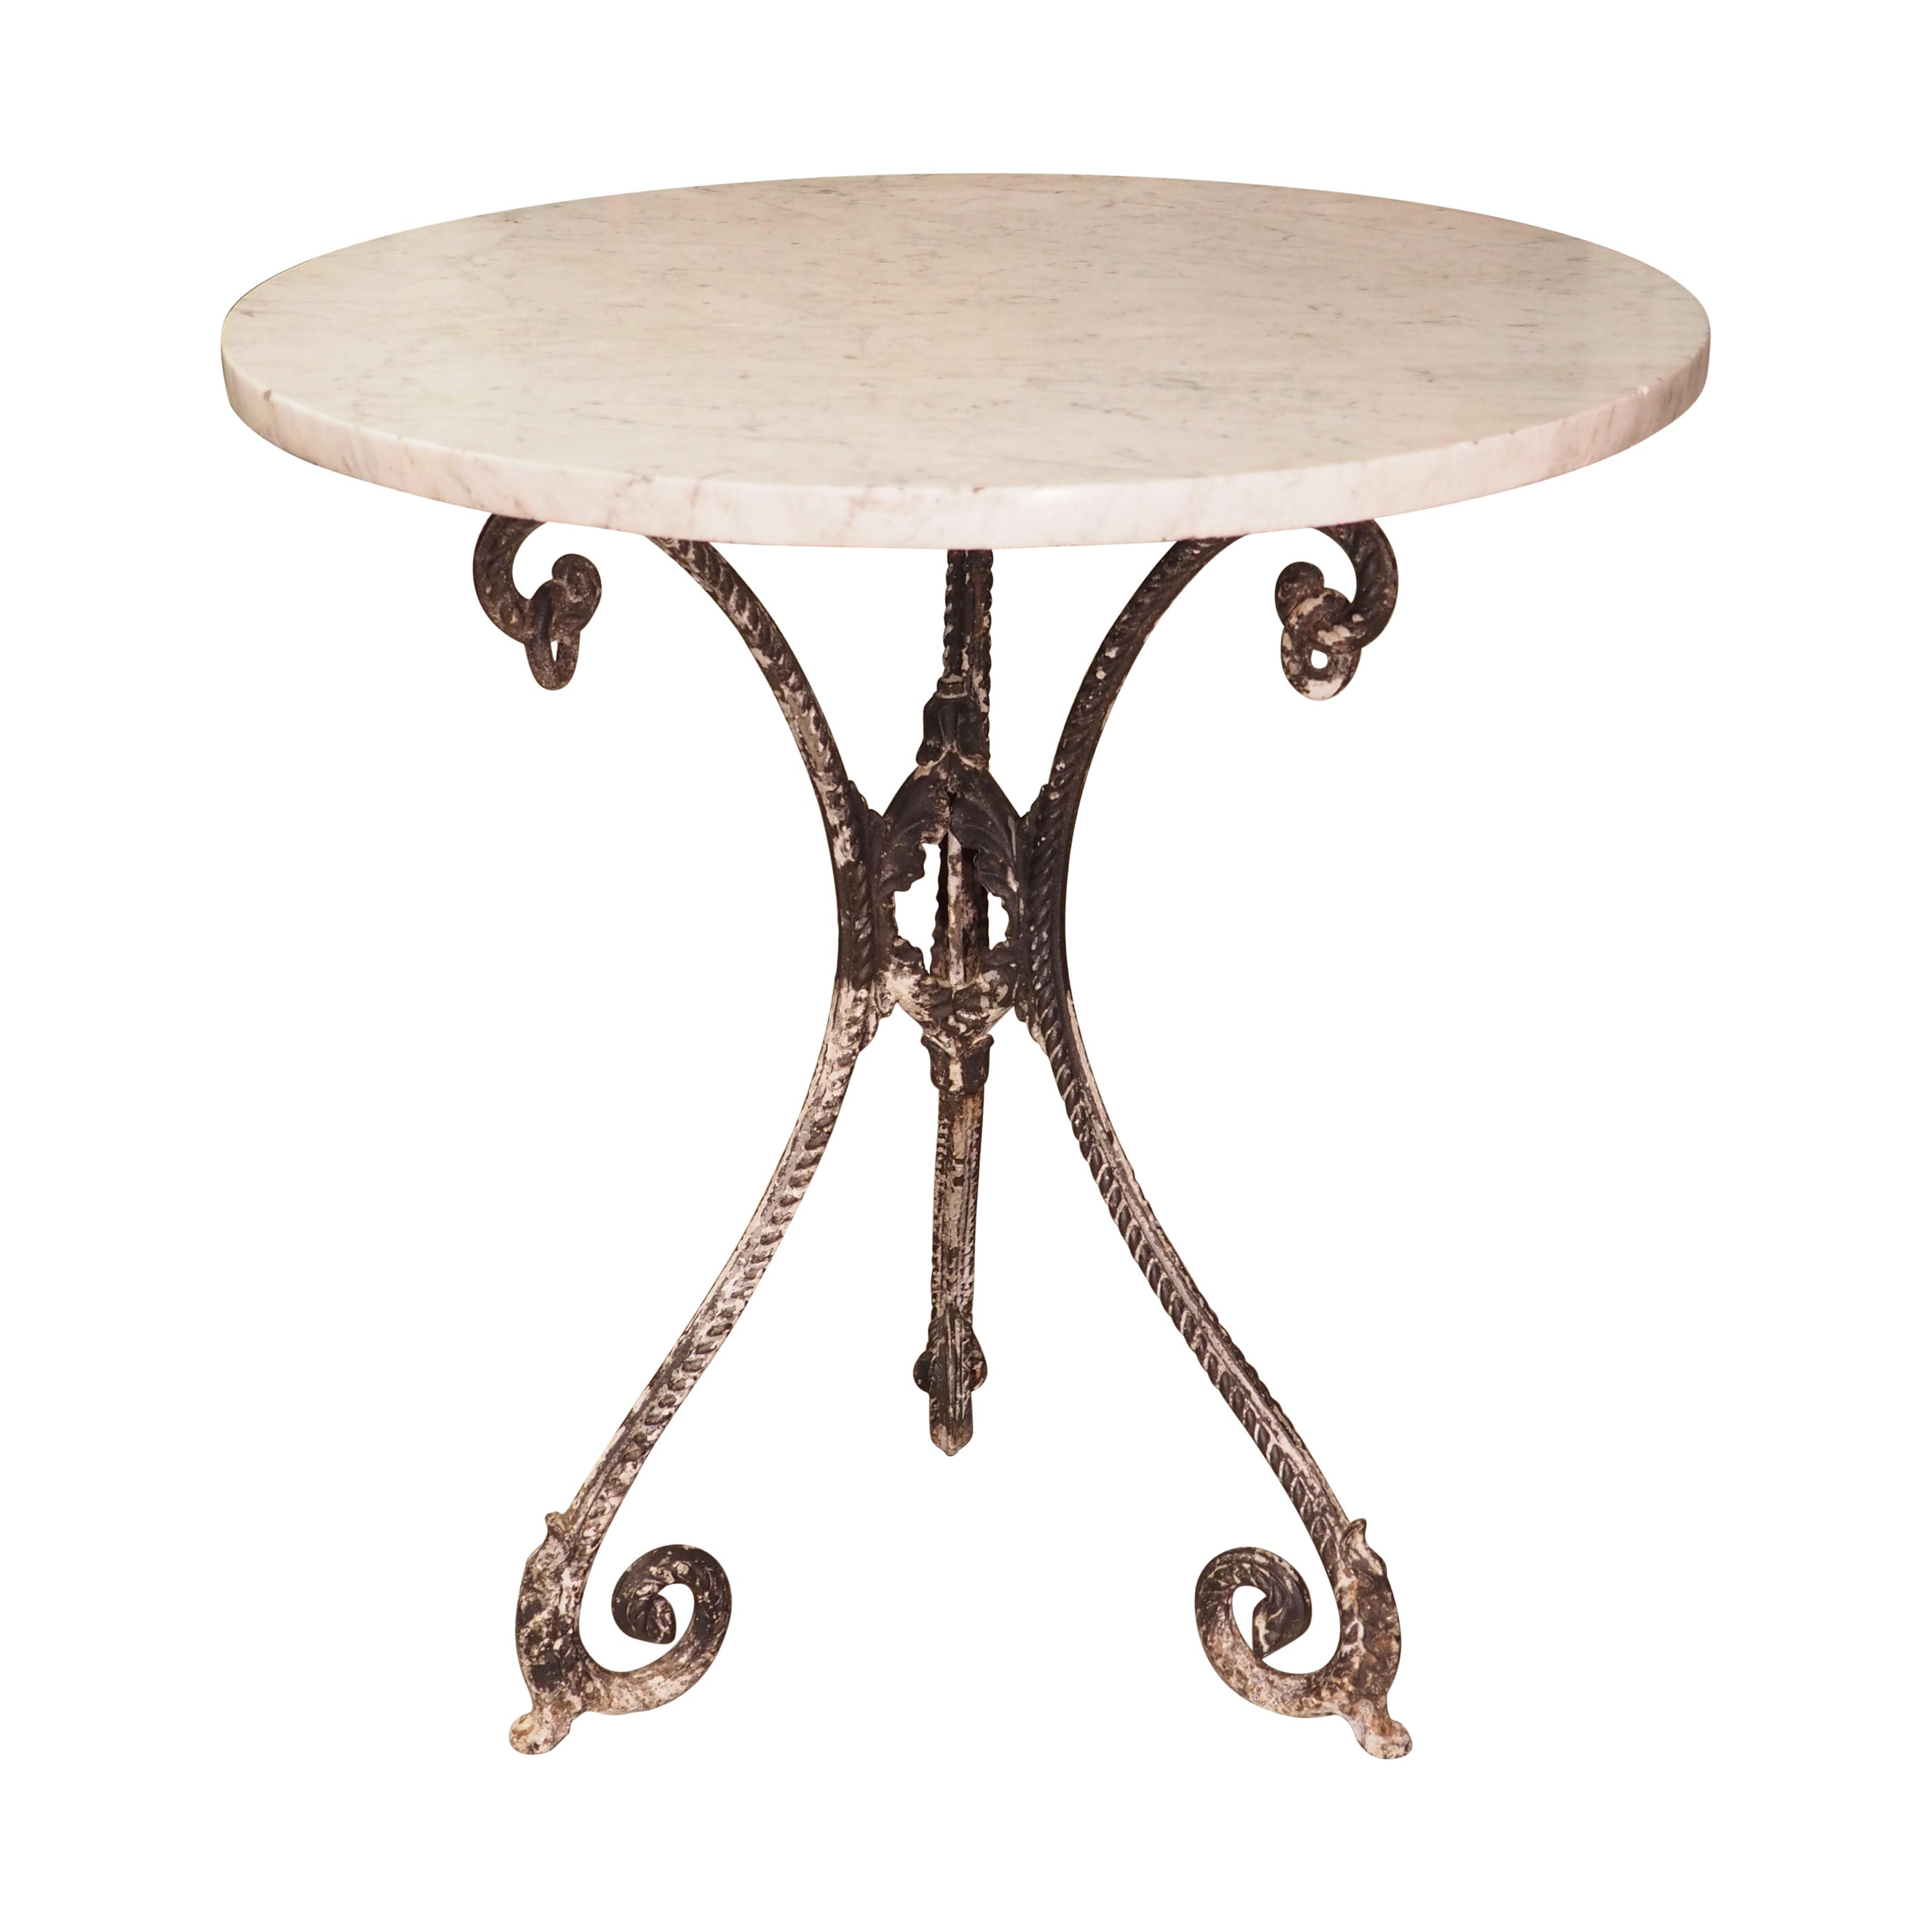 Circa 1900 Cast Iron and Marble Bistro Table from France